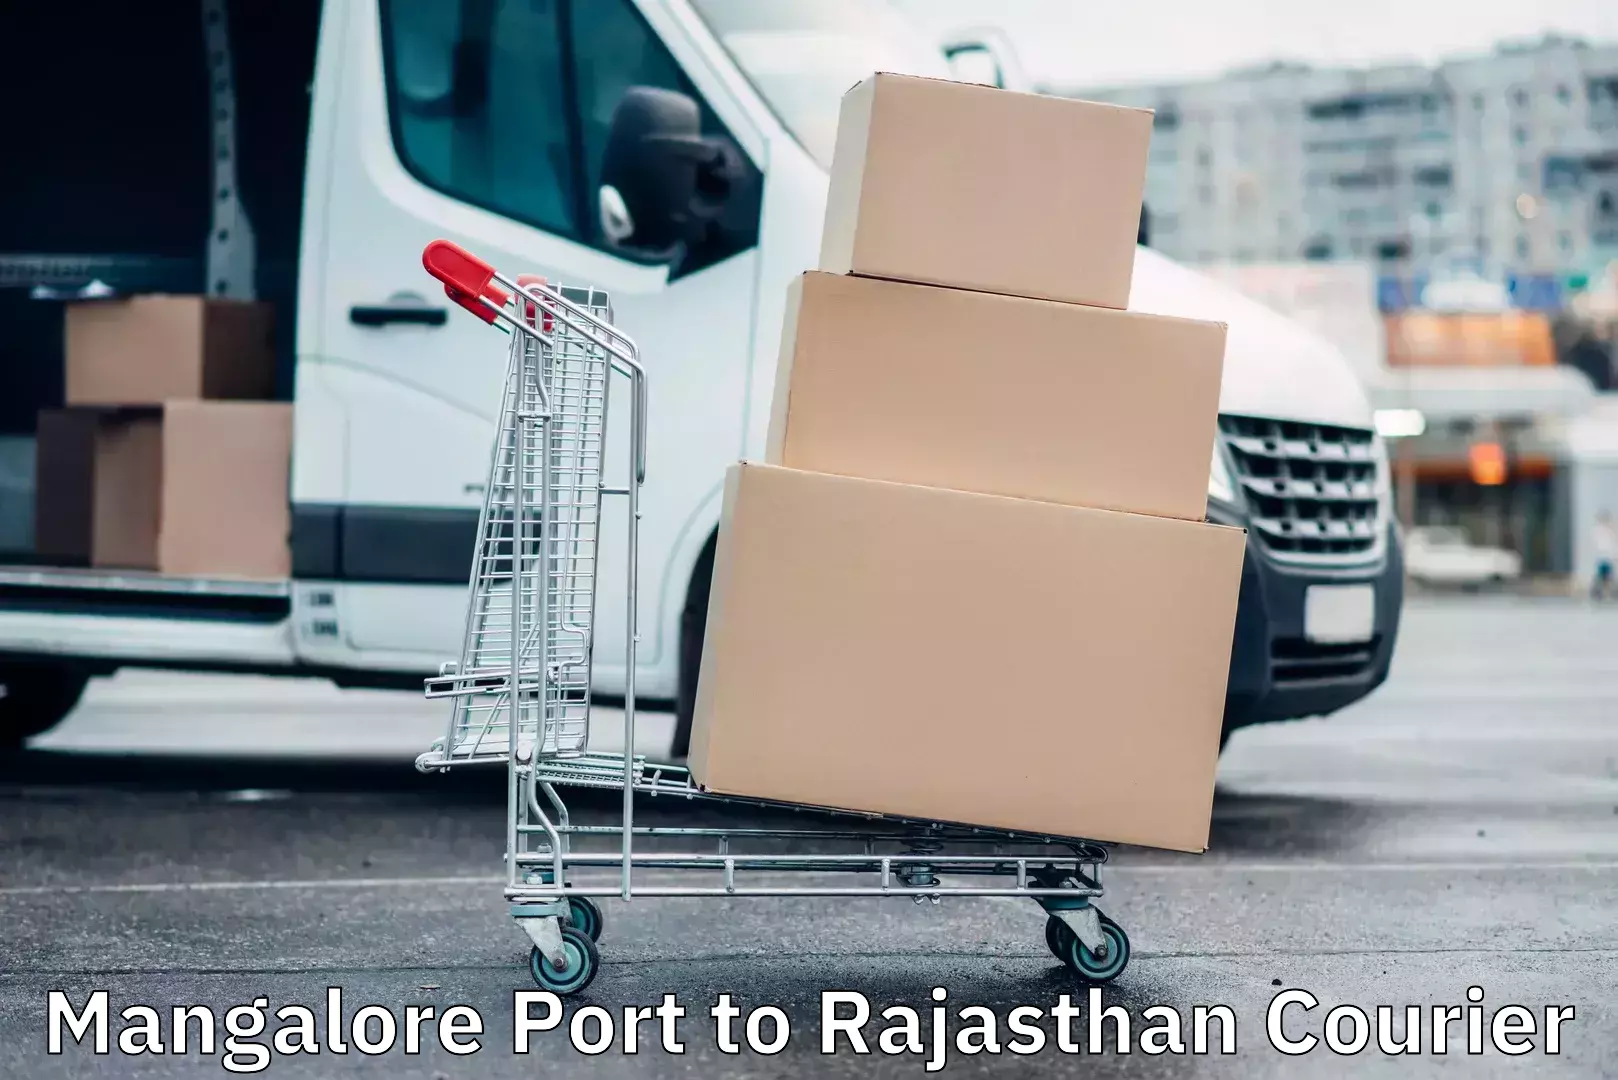 Nationwide courier service Mangalore Port to Rajasthan